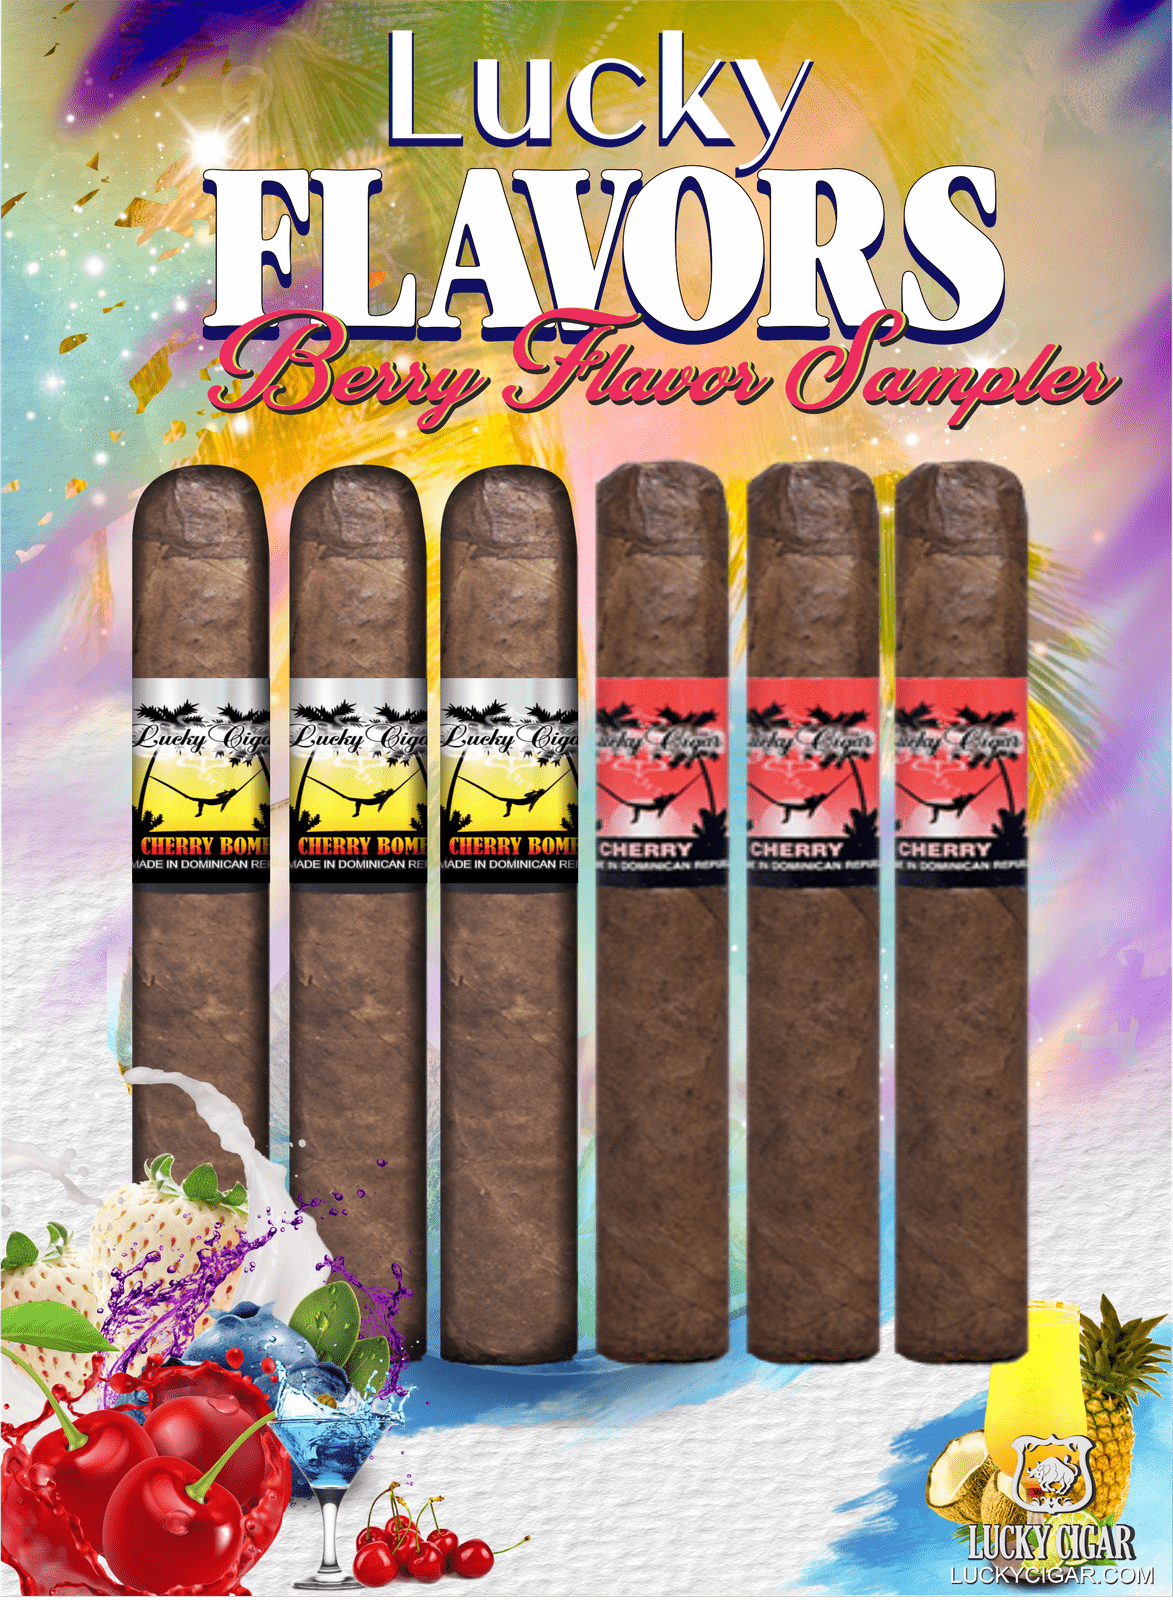 Flavored Cigars: Lucky Flavors 6 Piece Berry Fruit Sampler - Cherry Bomb, Cherry 3 Cherry Bomb 5x42 Cigars 3 Cherry 5x42 Cigars